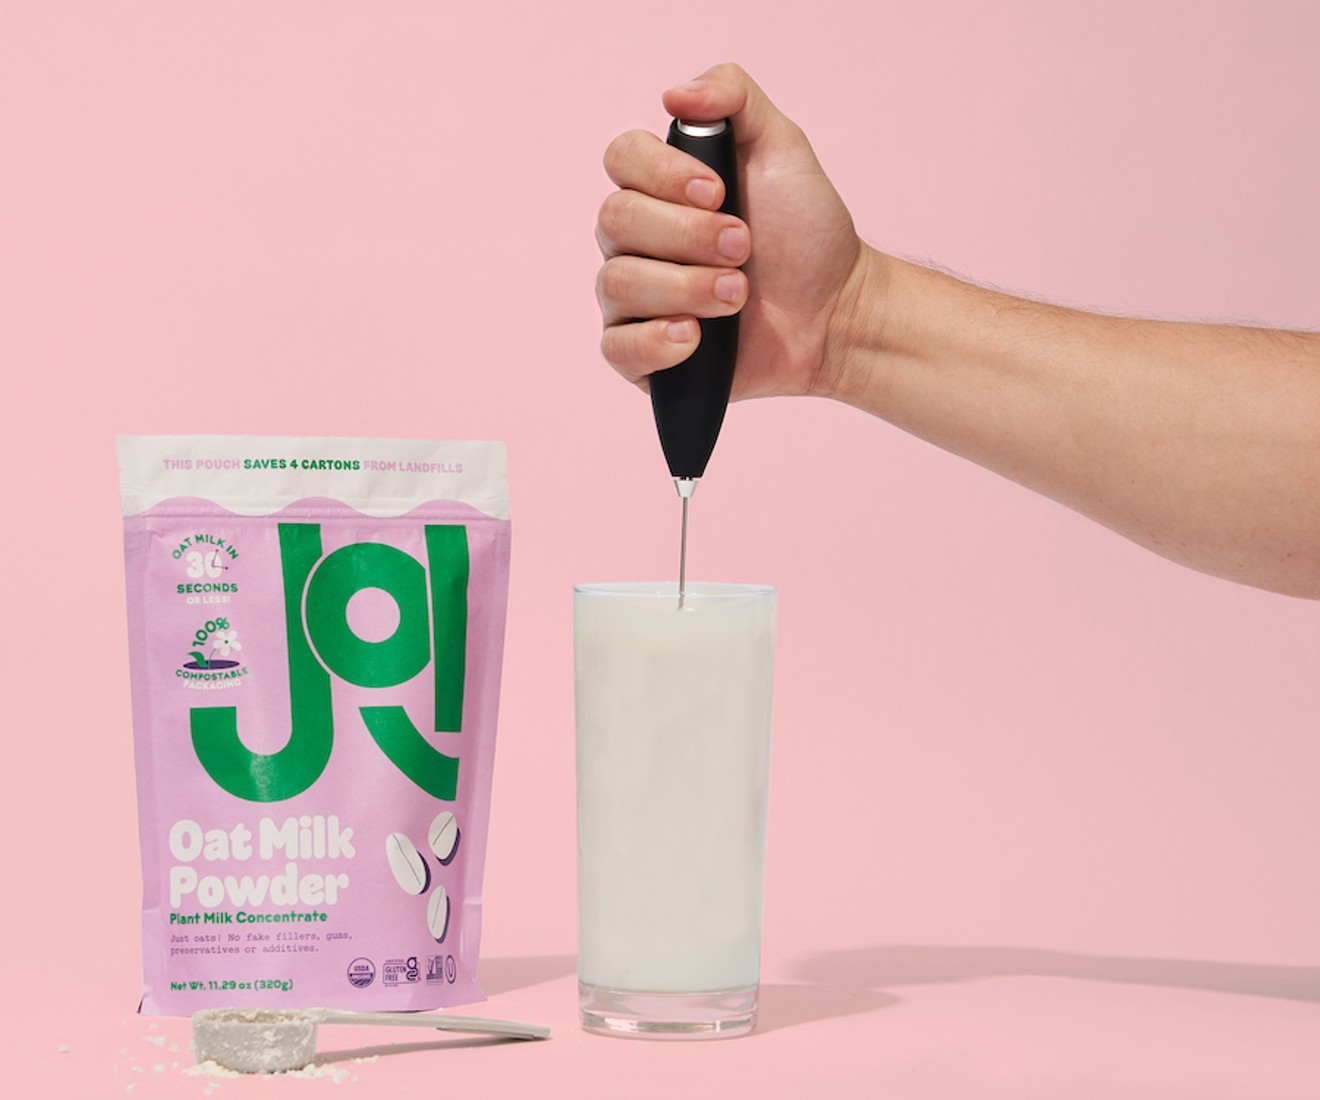 Joi powdered oat milk is the first dairy alternative to come in fully compostable packaging.